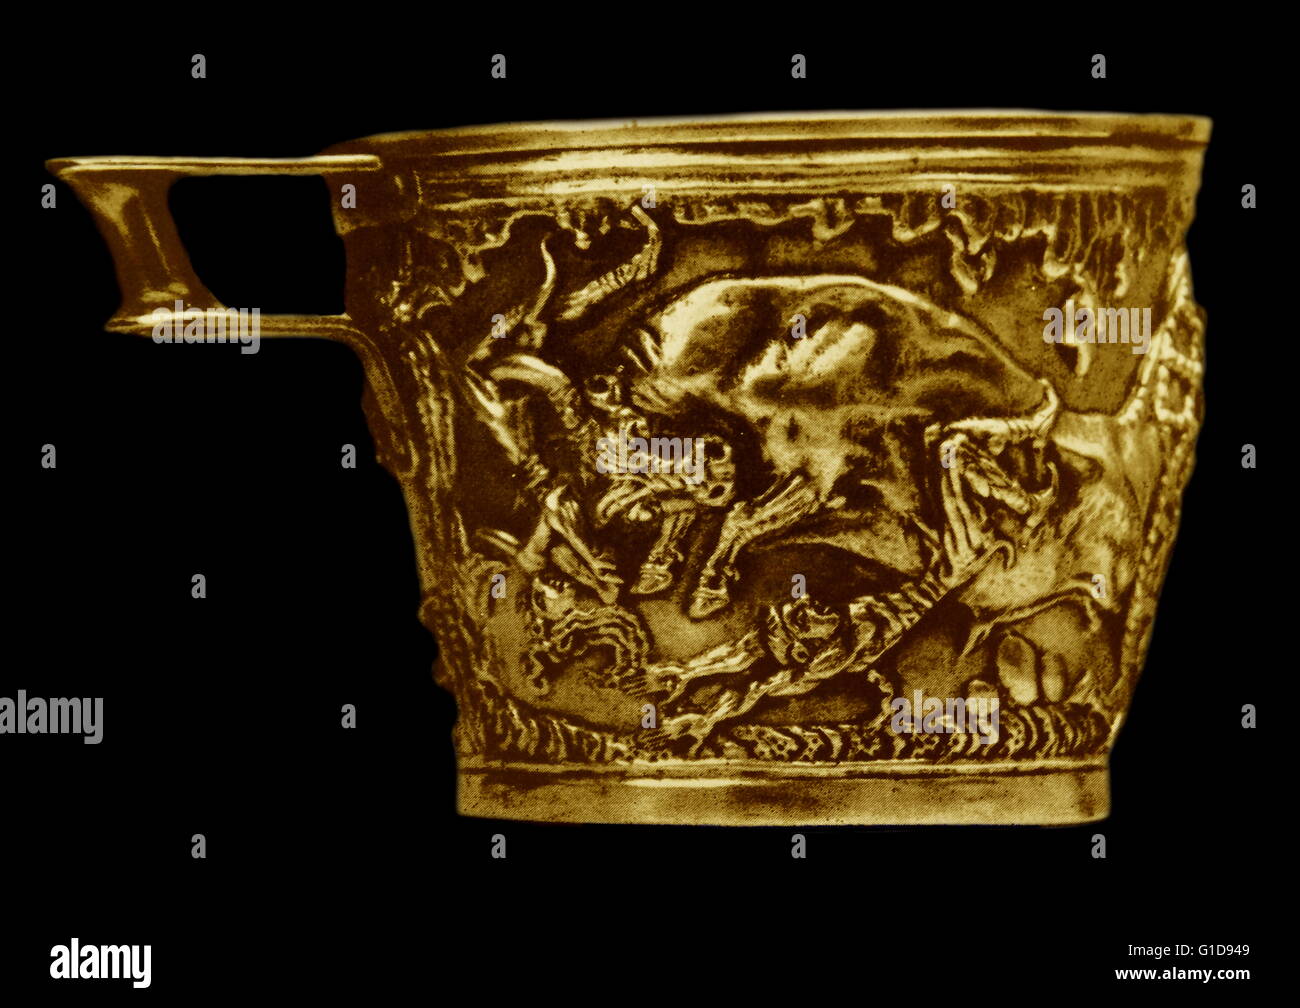 Mycenaean Vapheio cup, Late Bronze Age, First half of 15th c. B.C. Crete-Mycenaean metalwork, found together with other precious objects in the Vapheio tholos tomb. One-handled cup with flaring straight sides. decoration depicting bulls covers the entire surface Stock Photo